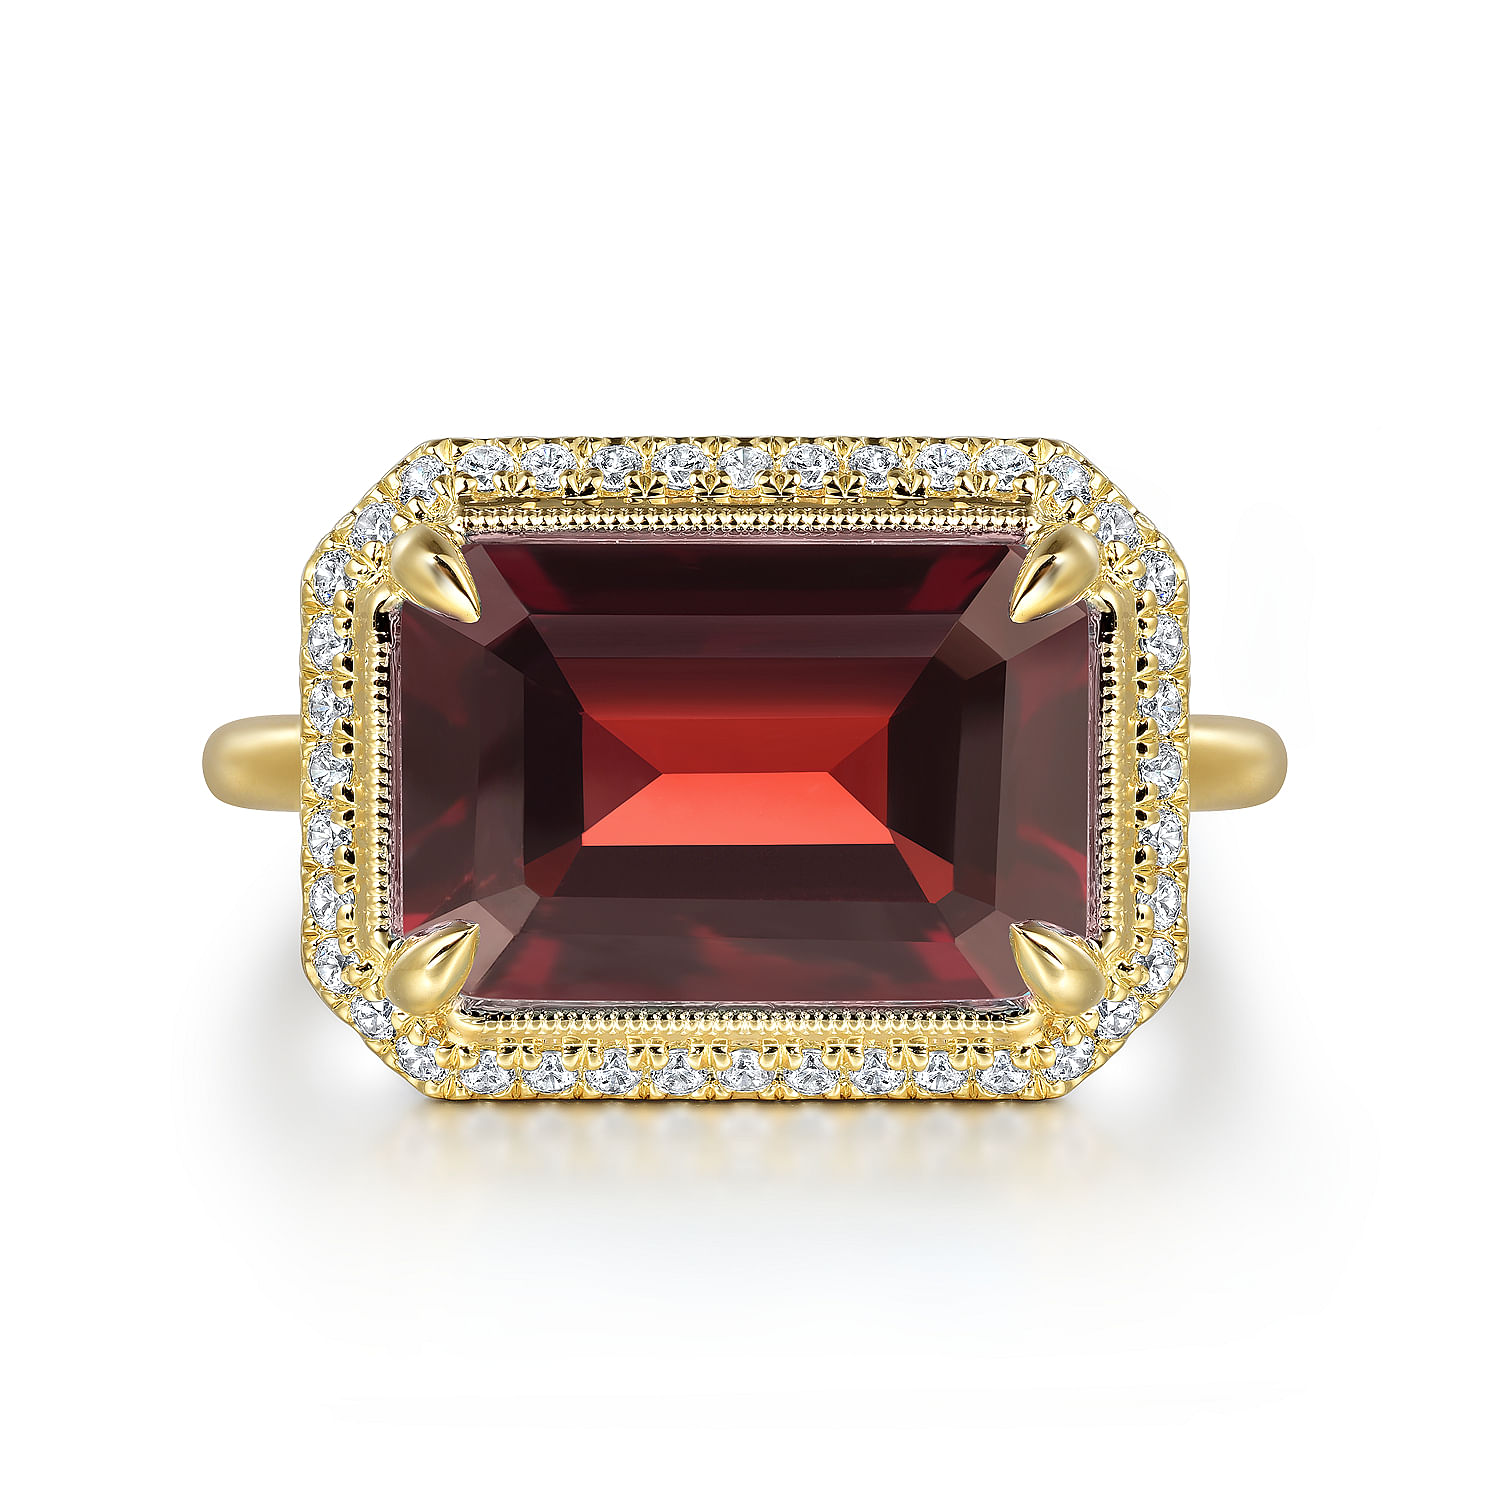 14K Yellow Gold Diamond and Garnet Emerald Cut Ladies Ring With Flower Pattern Gallery